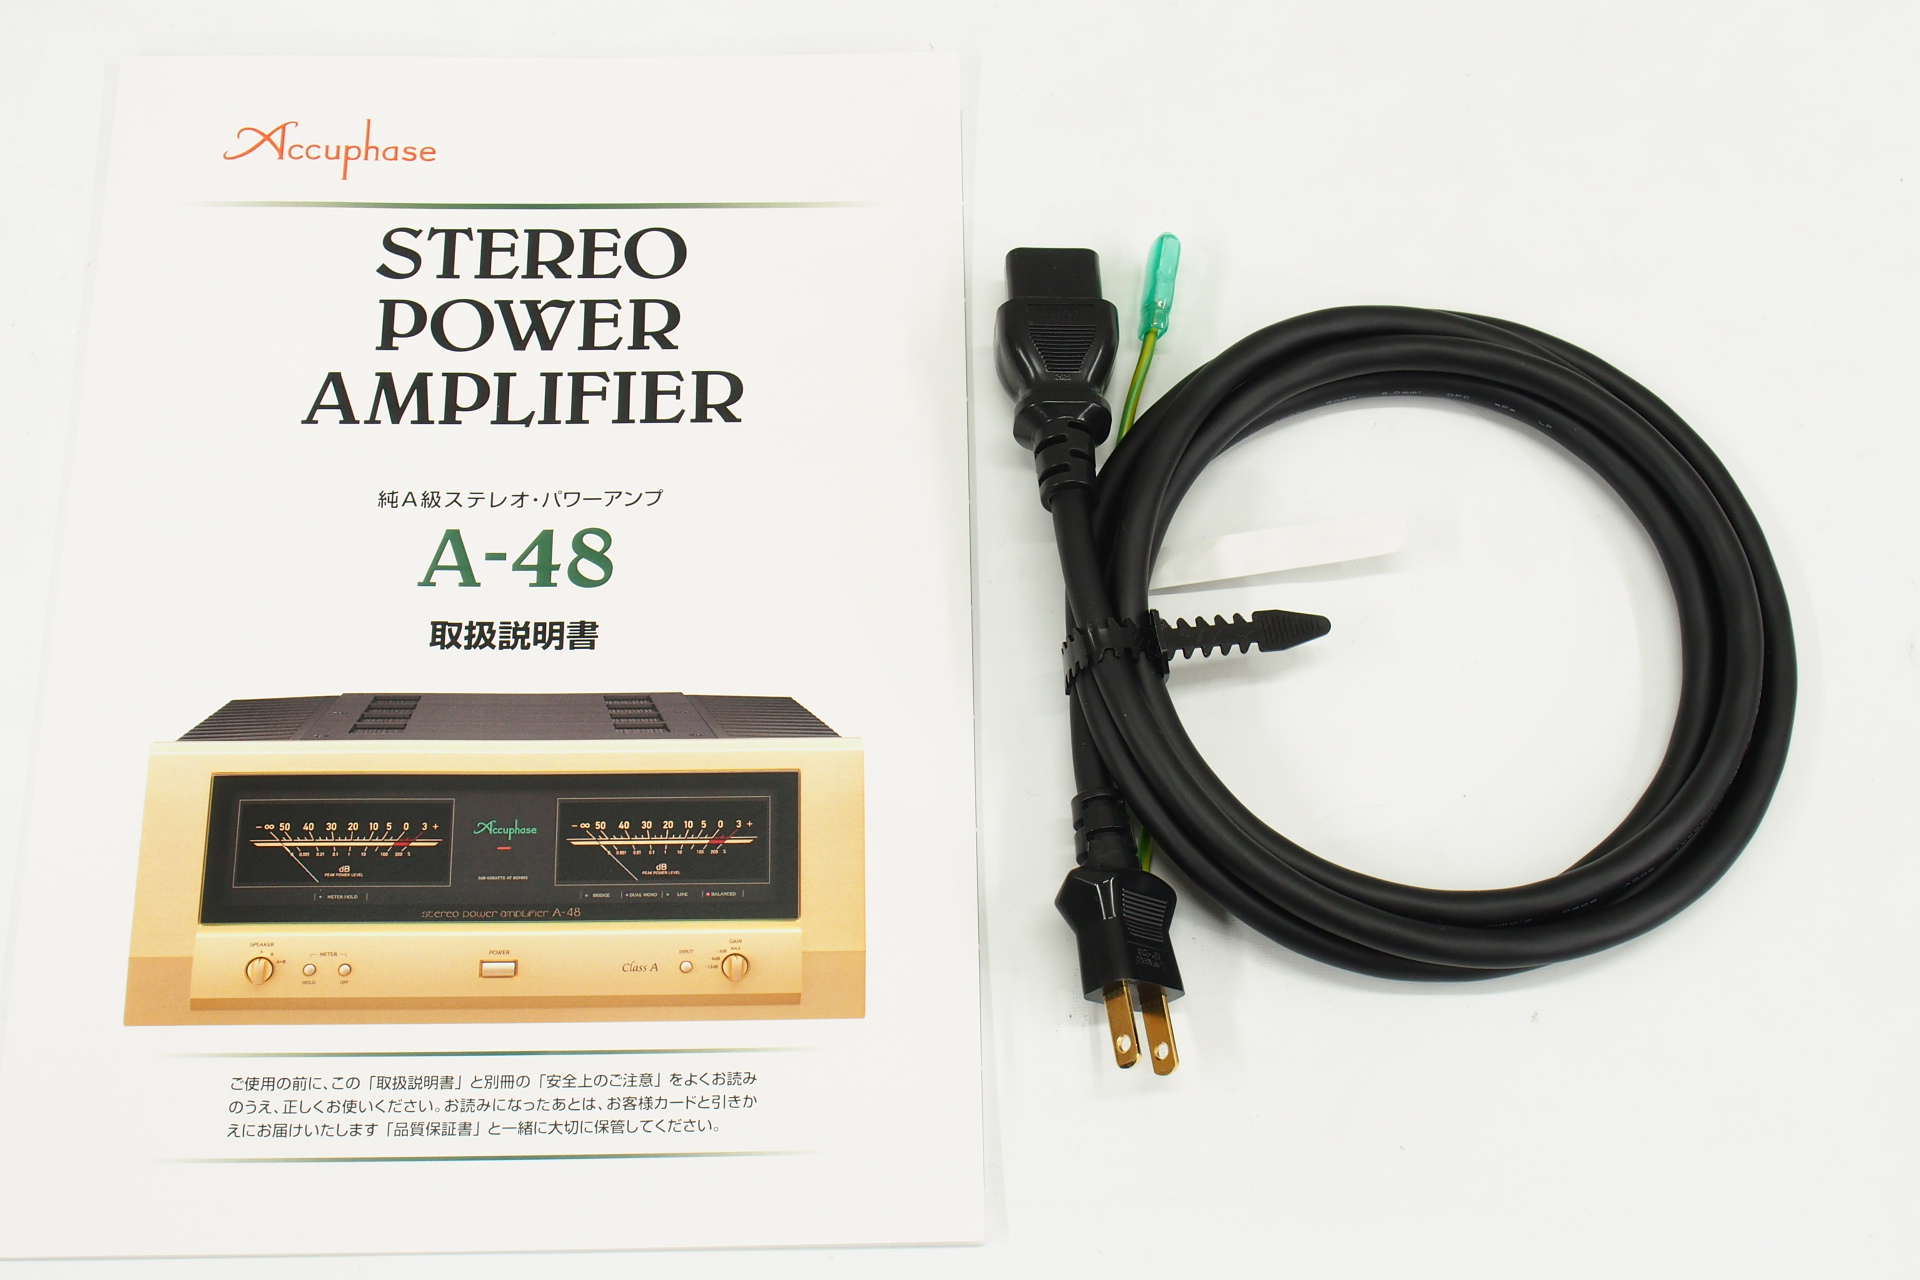 Accuphase アキュフェーズ A-36 パワーアンプ - オーディオ機器